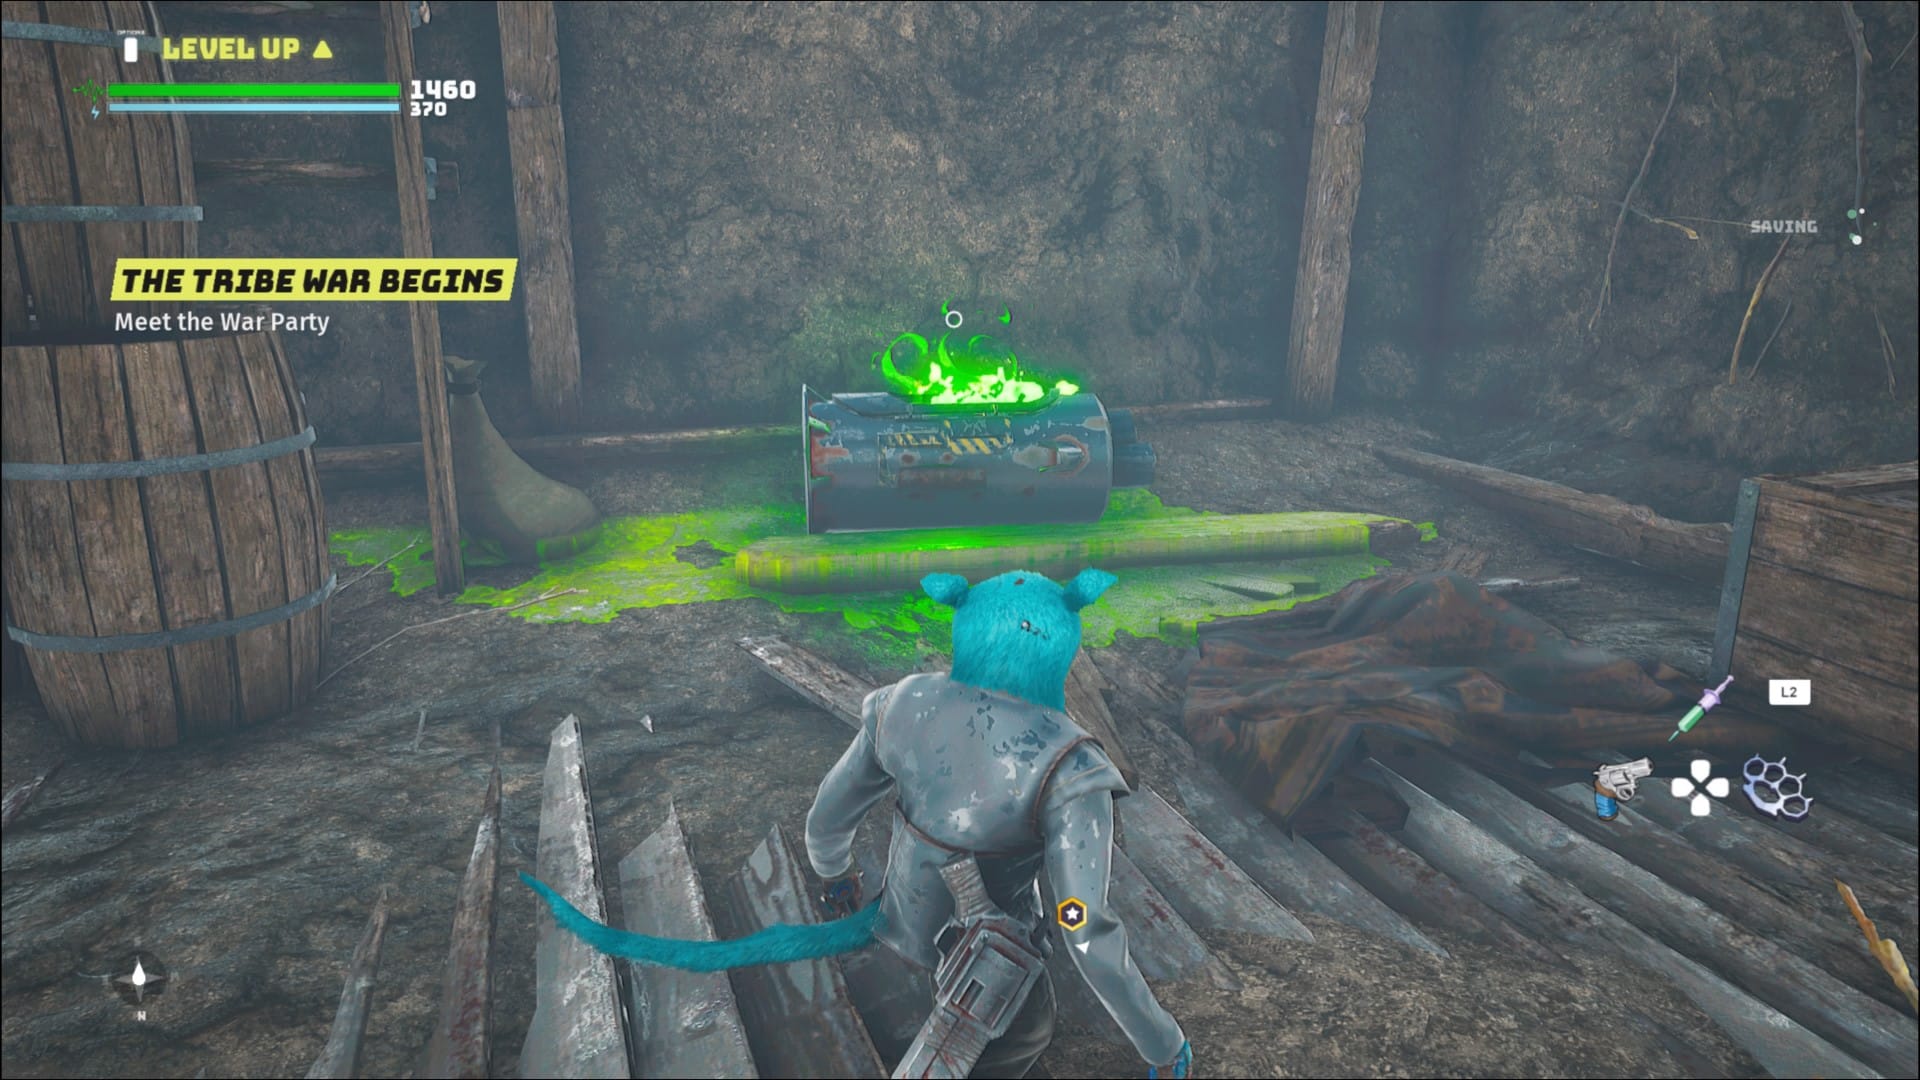 A creature staring at a container full of green glowing goo